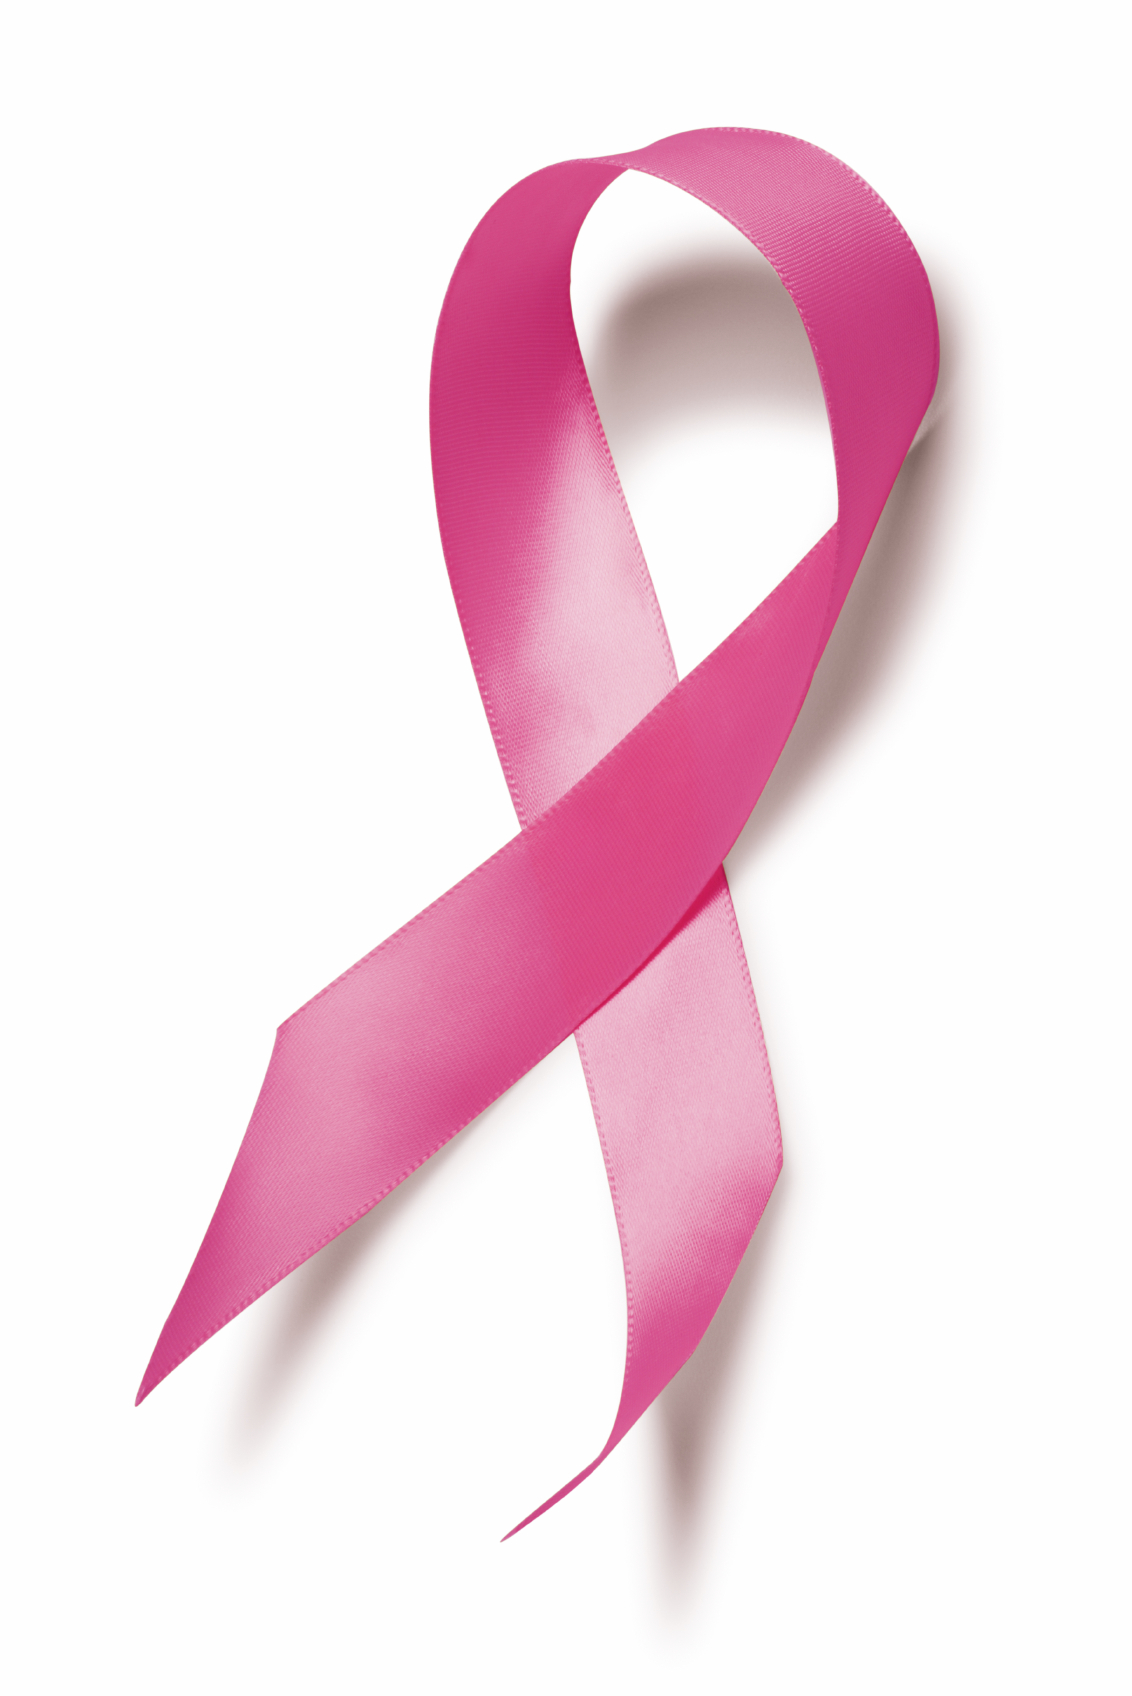 580 Cancer Ribbon free clipart.